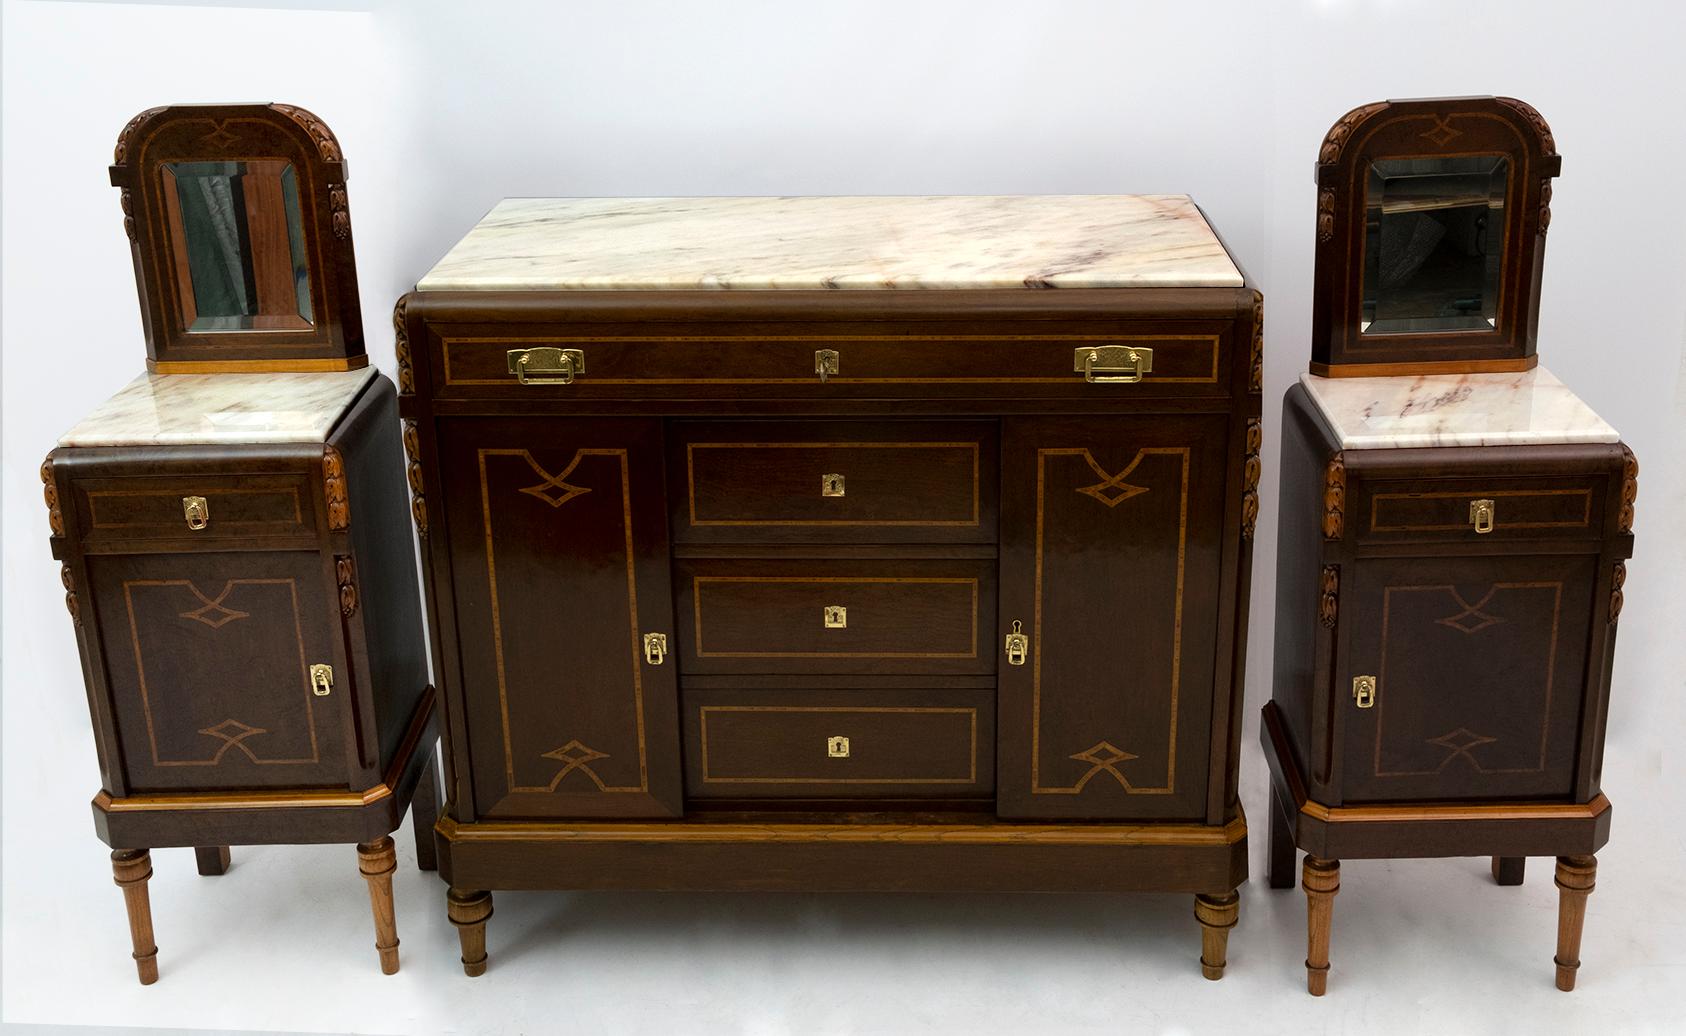 Beautiful bedroom set, consisting of a pair of bedside tables and chest of drawers in thuja briar, maple inlays and Portuguese pink marble top, Italian production of the 1920s. The set has been restored and polished with shellac.

The bedside tables